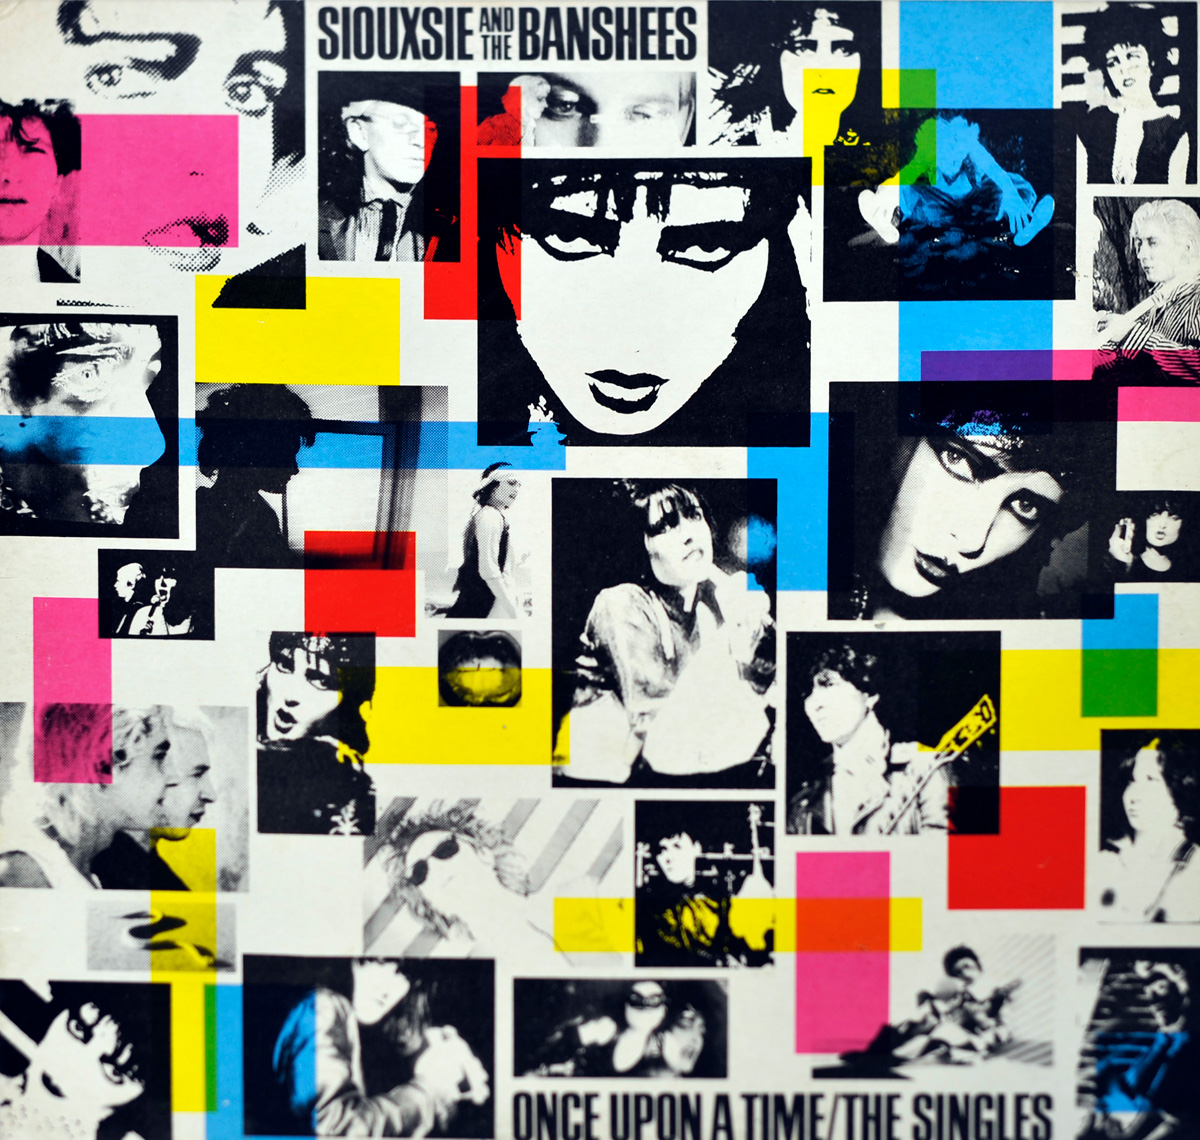 SIOUXSIE & THE BANSHEES - ONCE UPON A TIME "THE SINGLES" 12" LP VINYL